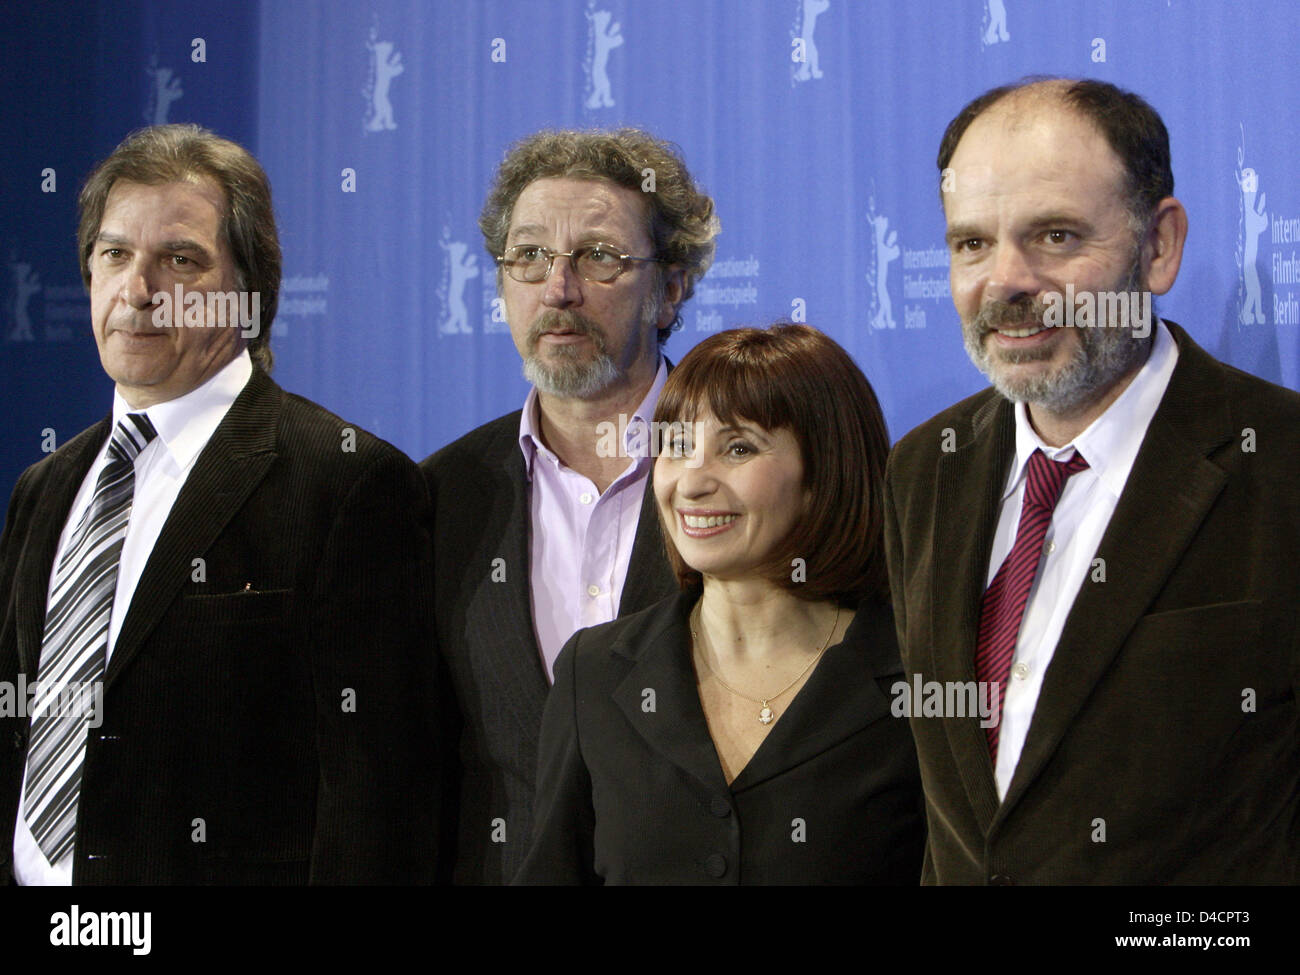 French actor Gerard Meylan (L-R), director Robert Guediguian, actors Ariane Ascaride and Jean-Pierre Darroussin pose during a photo call for their film 'Lady Jane' at the 58th Berlin International Film Festival in Berlin, Germany, 13 February 2008. The film runs in competition for the Golden and Silver Bears at the 58th Berlinale. Photo: Arno Burgi Stock Photo